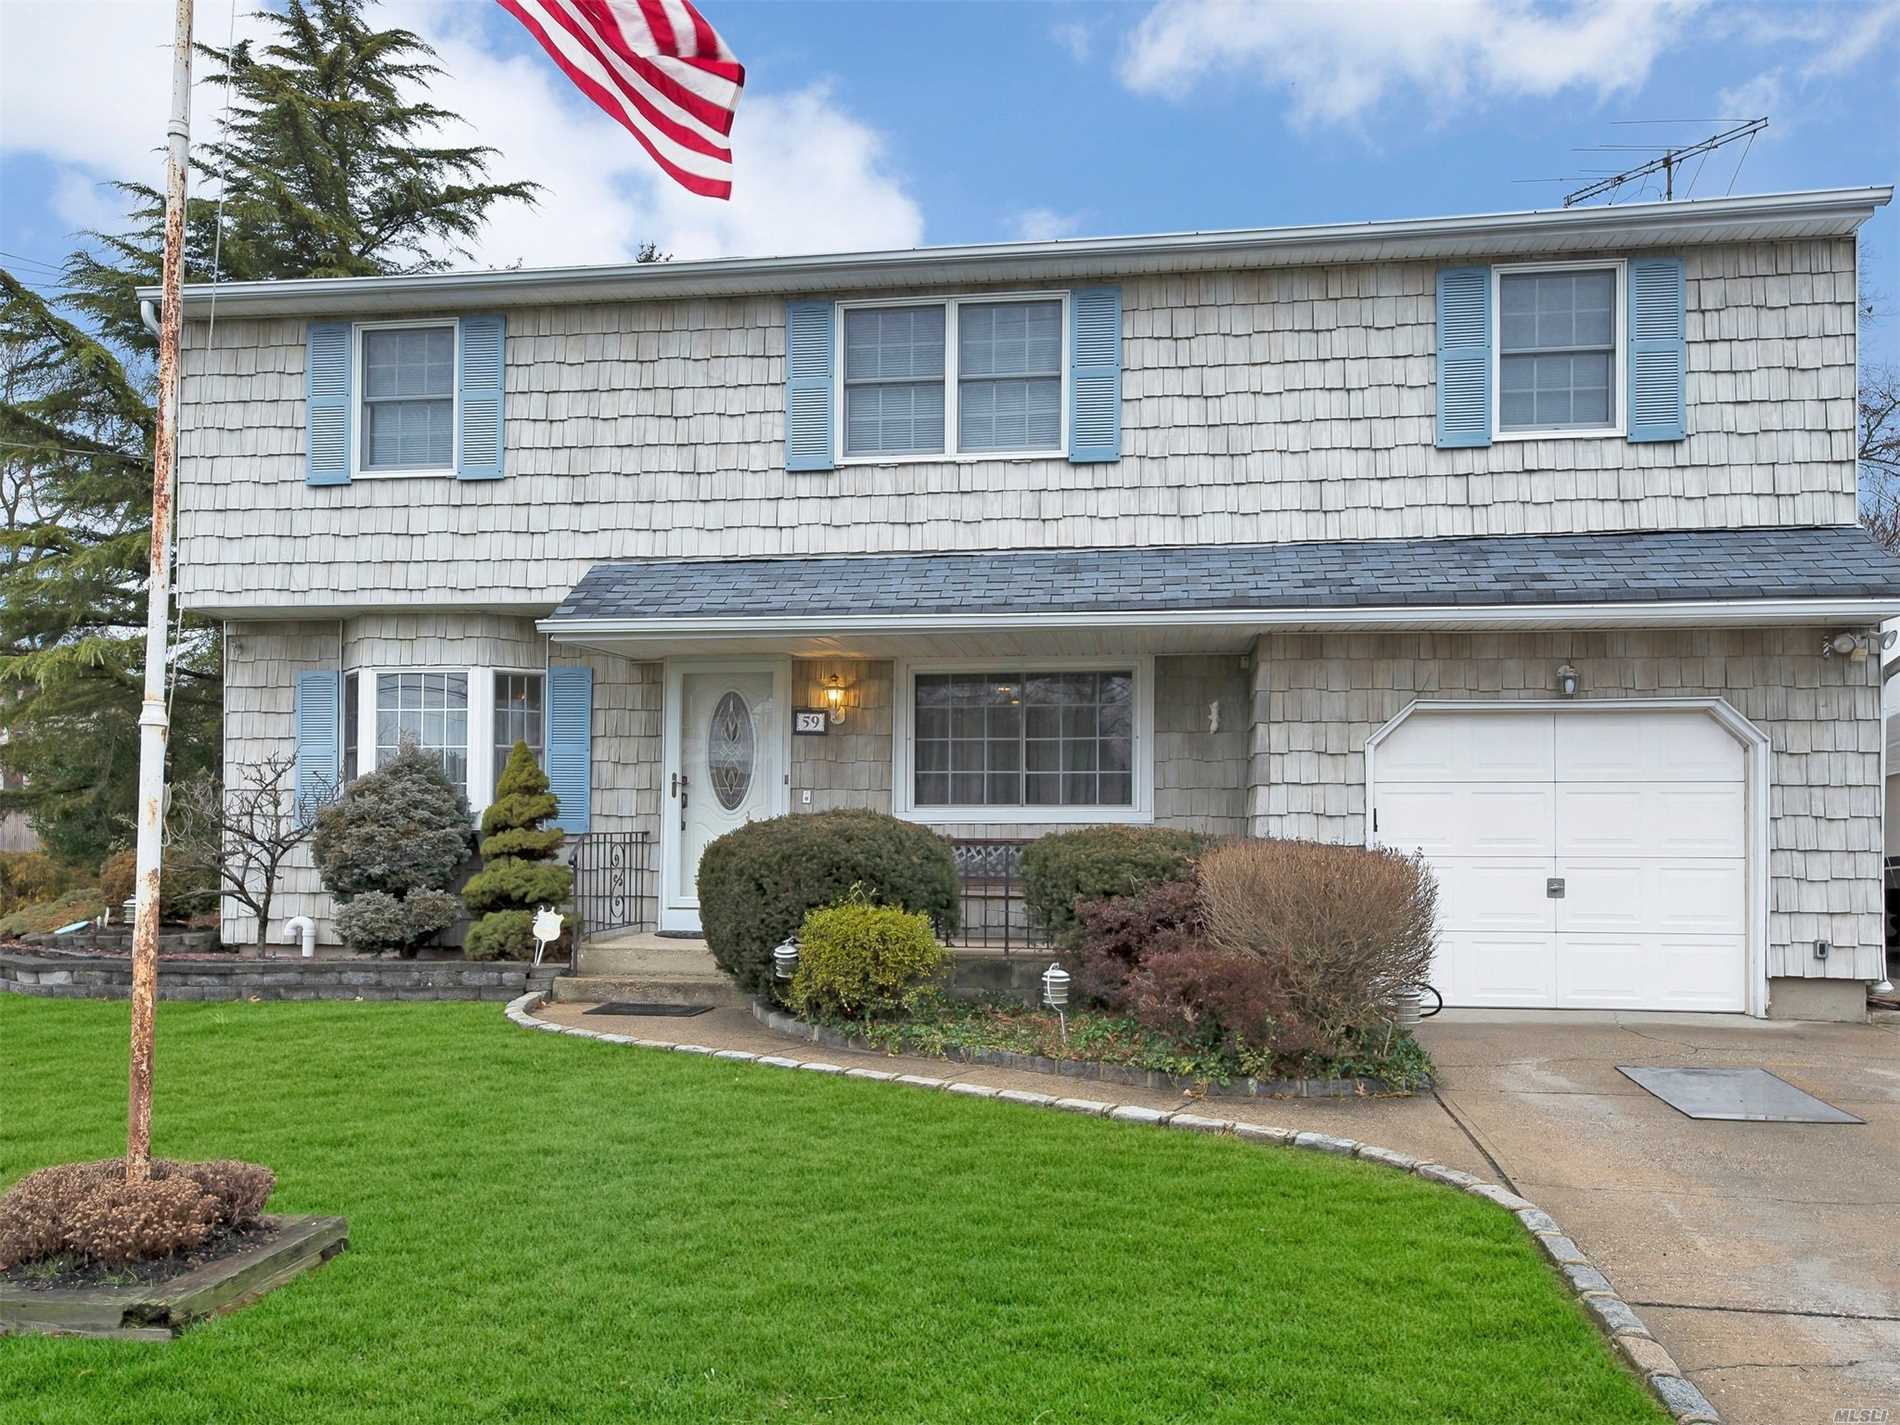 Beautiful, 5 Bedroom Meticulously Maintained Colonial With Office And Sunroom This Home Sits On A Well-Manicured Corner Lot In A Quiet Neighborhood. A Perfect Home For A Growing Family.